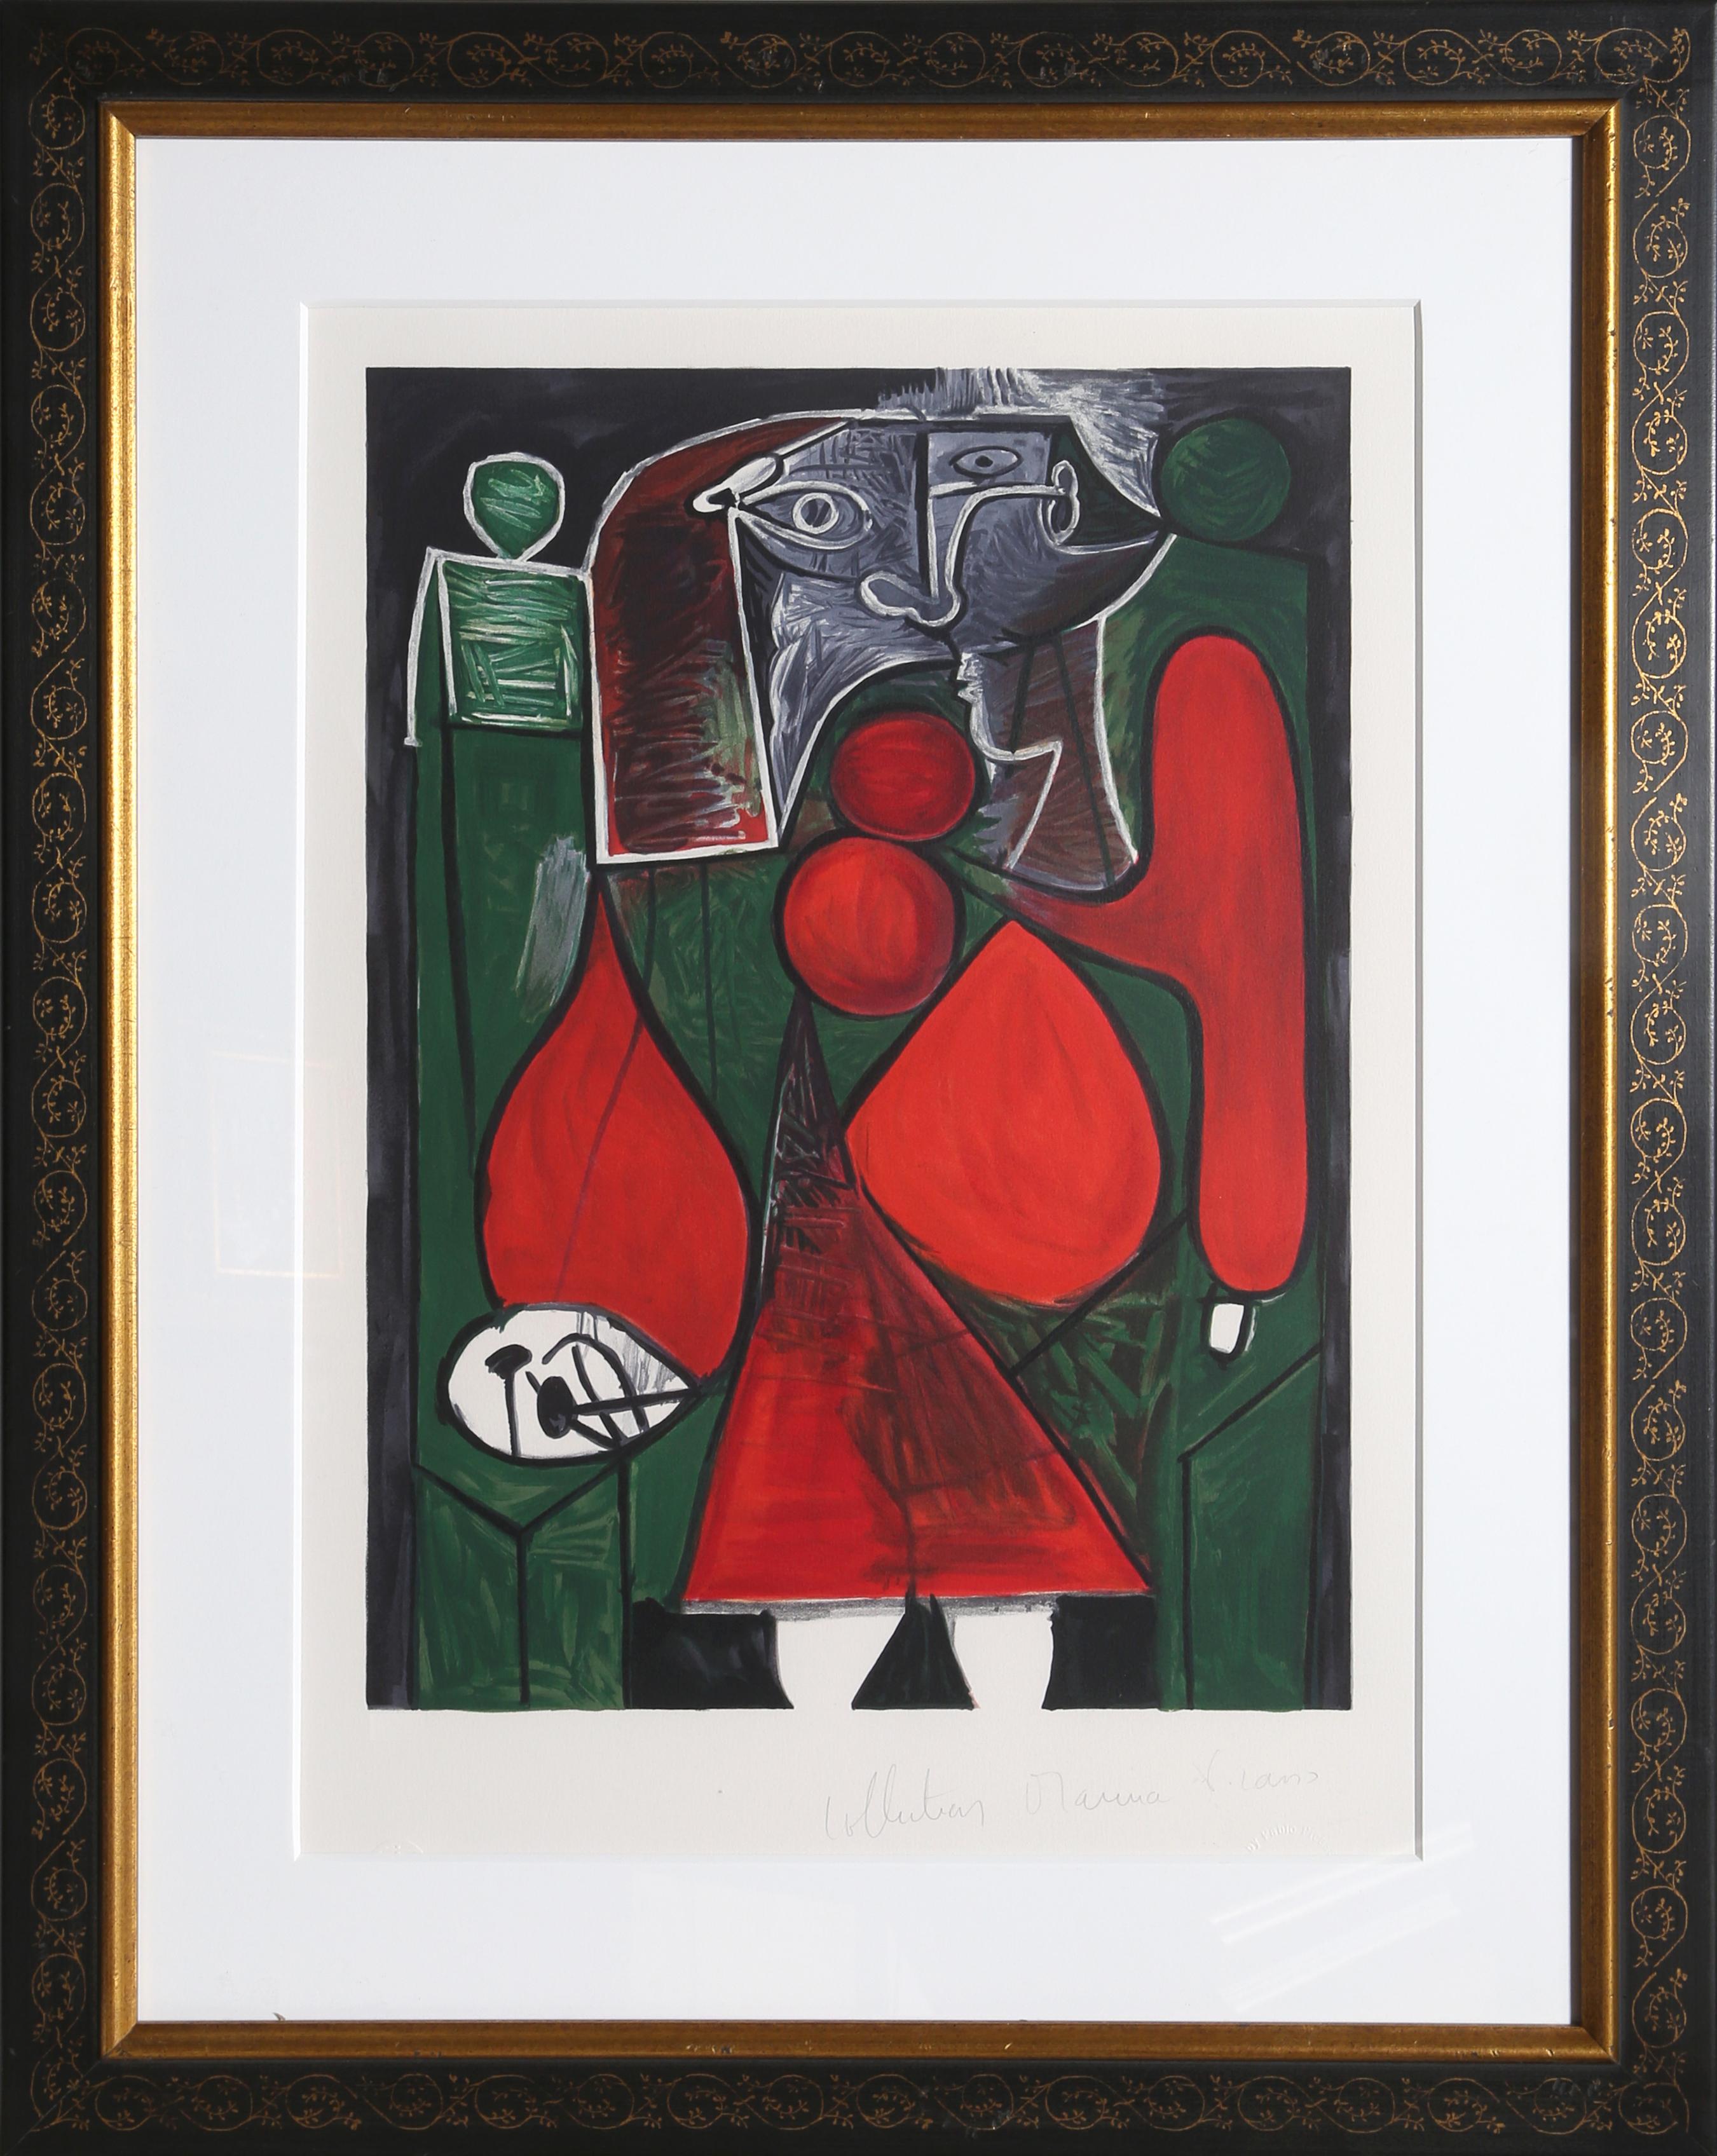 Resting in an armchair, the woman dressed in vibrant red appears fragmented and angular due to the artist’s reduction of her figure into geometric forms. Pablo Picasso’s portrayal of the woman is viewed from multiple perspectives, refuting the